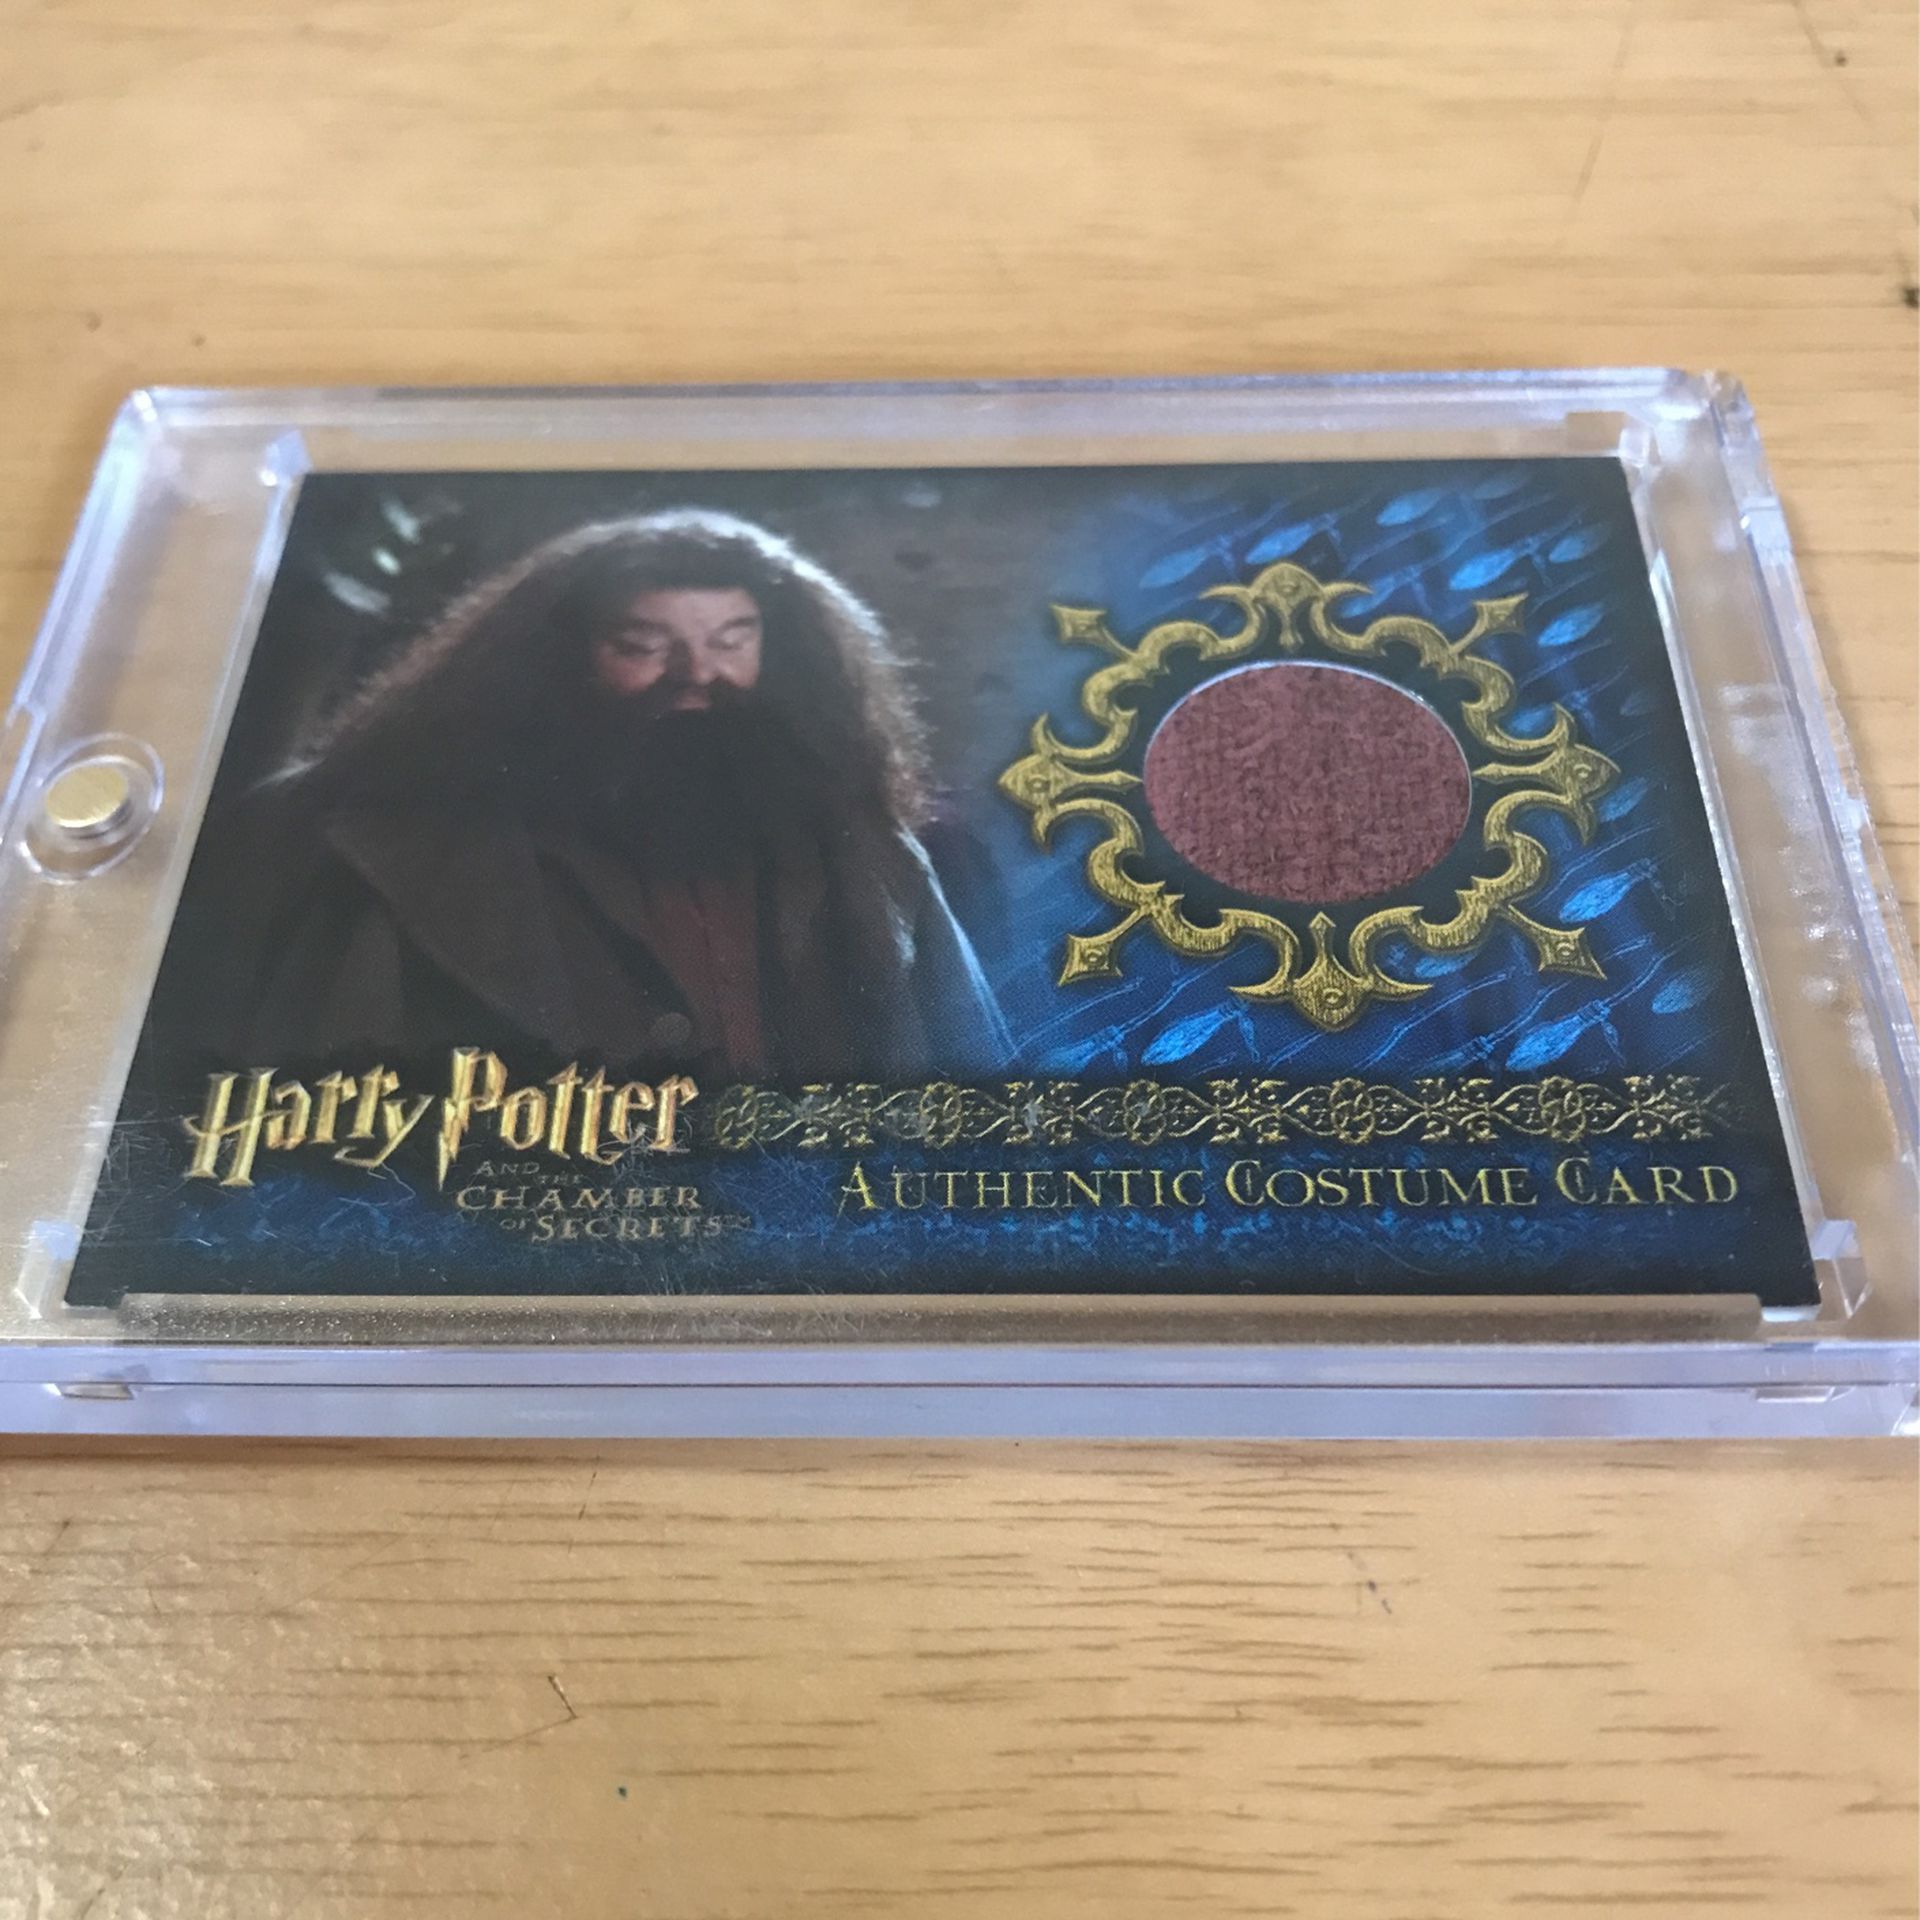 Harry Potter Authentic Costume Card  # 339 / 515